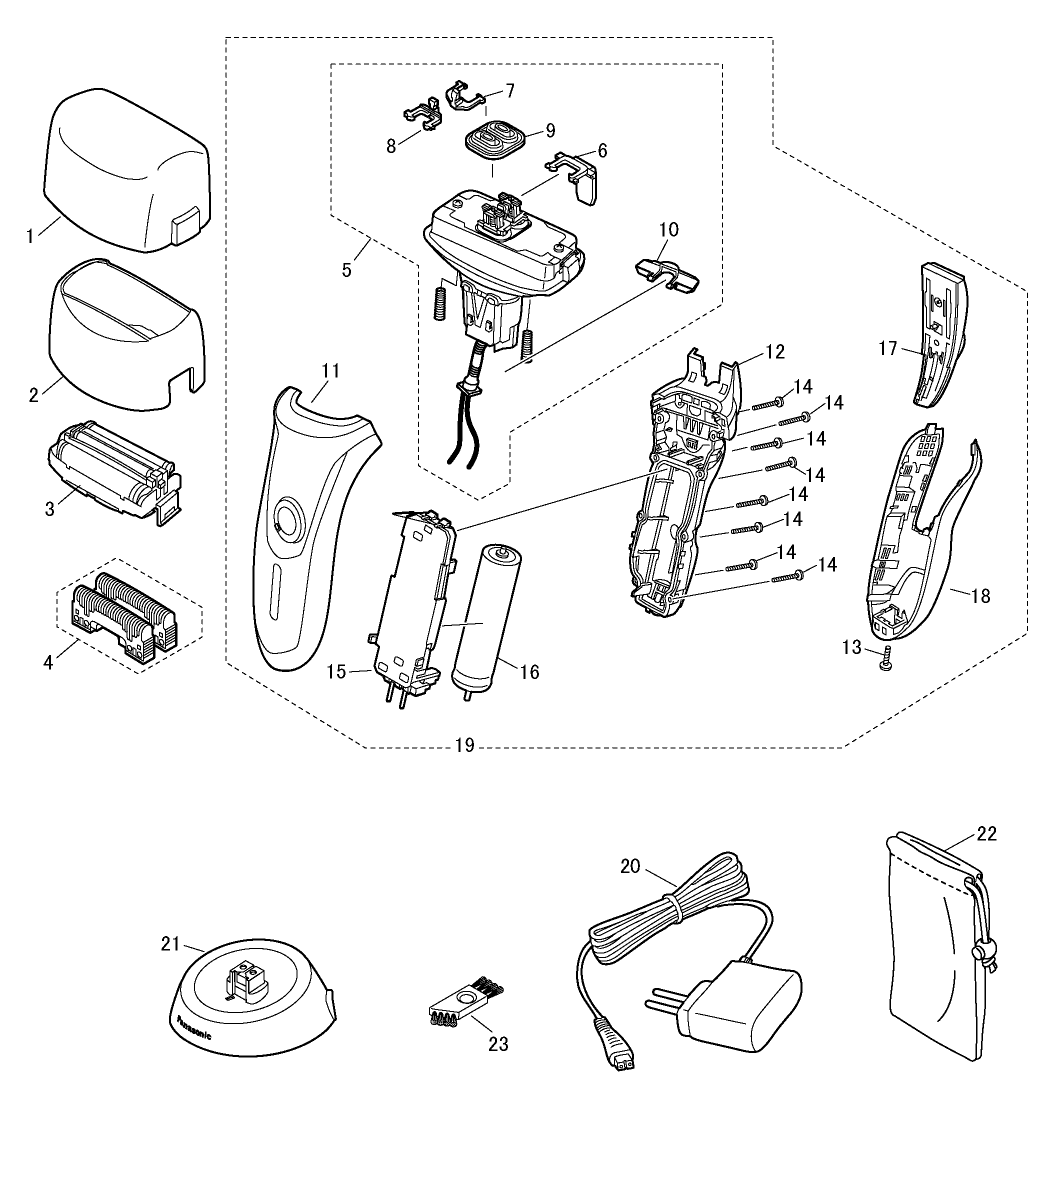 ES-RF41: Exploded View